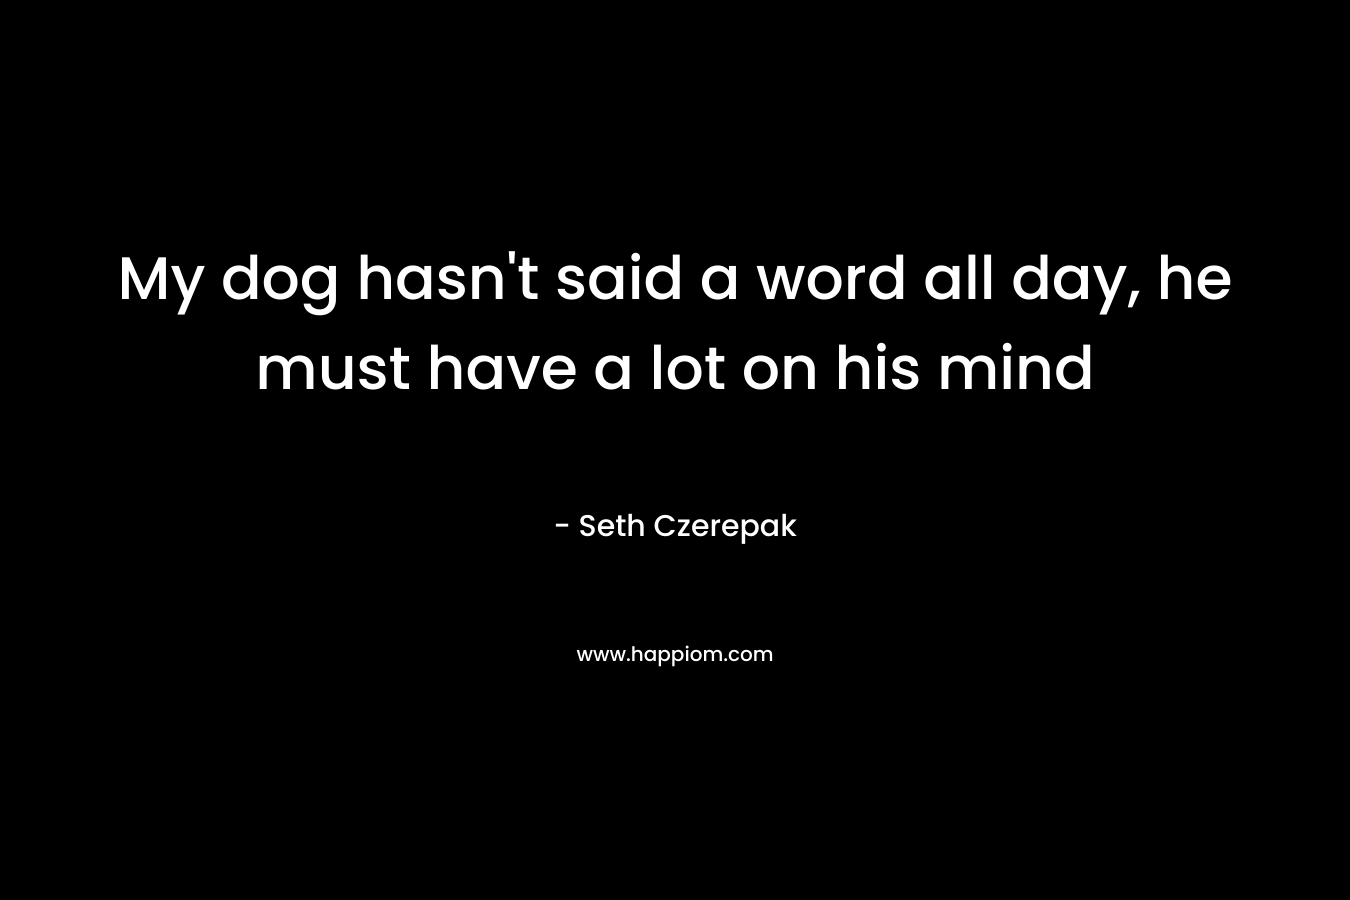 My dog hasn’t said a word all day, he must have a lot on his mind – Seth Czerepak